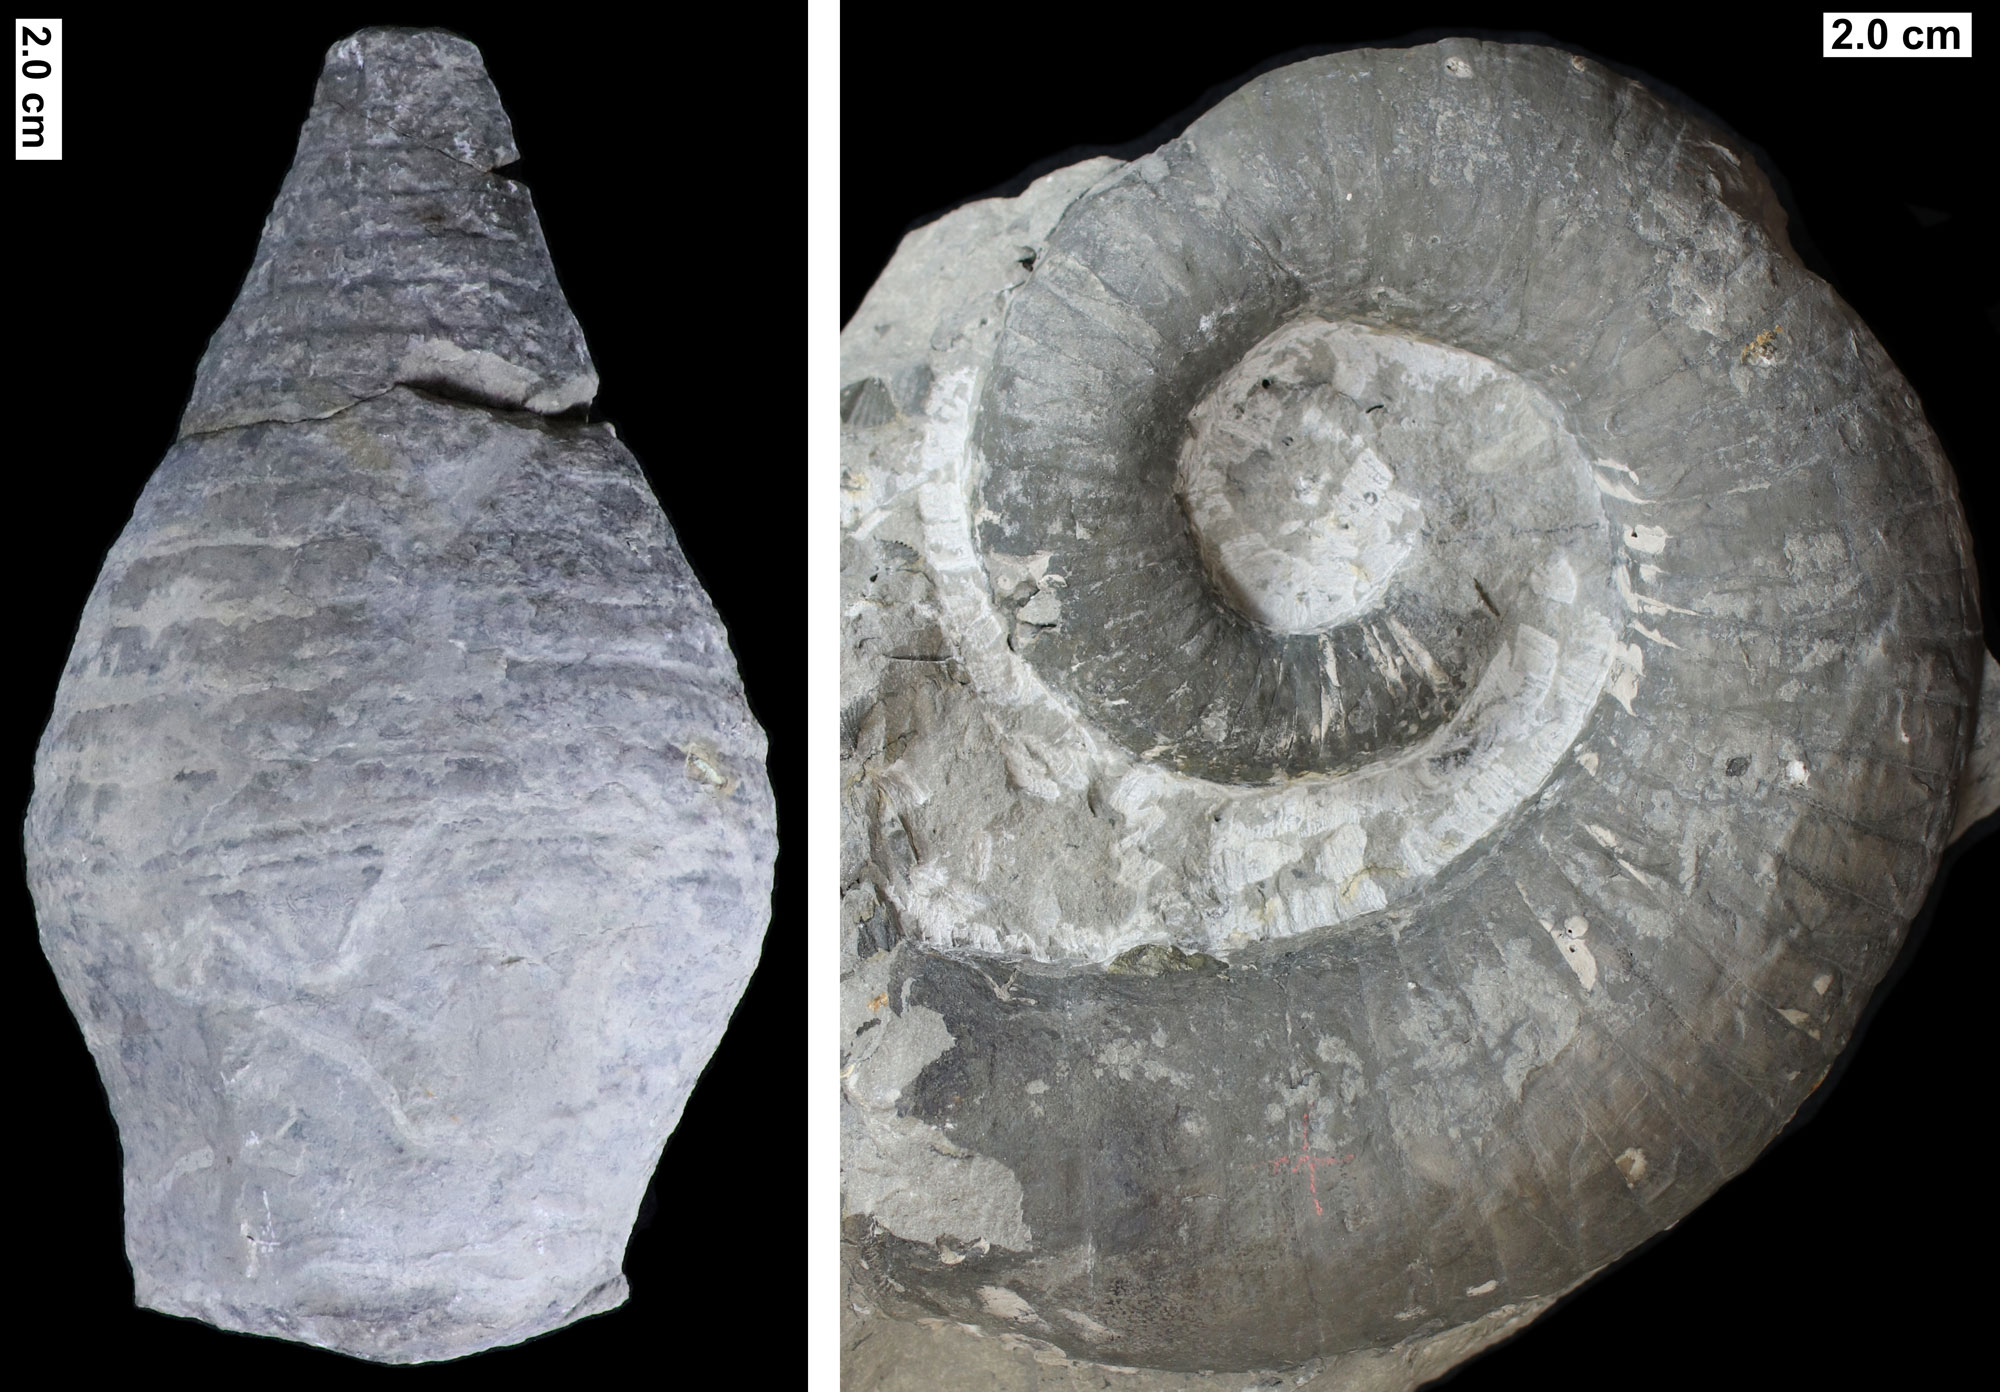 2-panel figure made up of photographs of nautiloid cephalopods from the Devonian of Wisconsin. Panel 1: Straight-shelled cephalopod. The photo shows a shells that is wide at the base, gets wider about 1/3 of the way up from the base, and tapers near the apex. A series of regularly spaced sutures occurs on the shell. Panel 2: Loosely coiled cephalopod shell. The photo shows a shell coiling in a single plane, with the coils not touching each other. Regularly spaced sutures occur on the shell. 